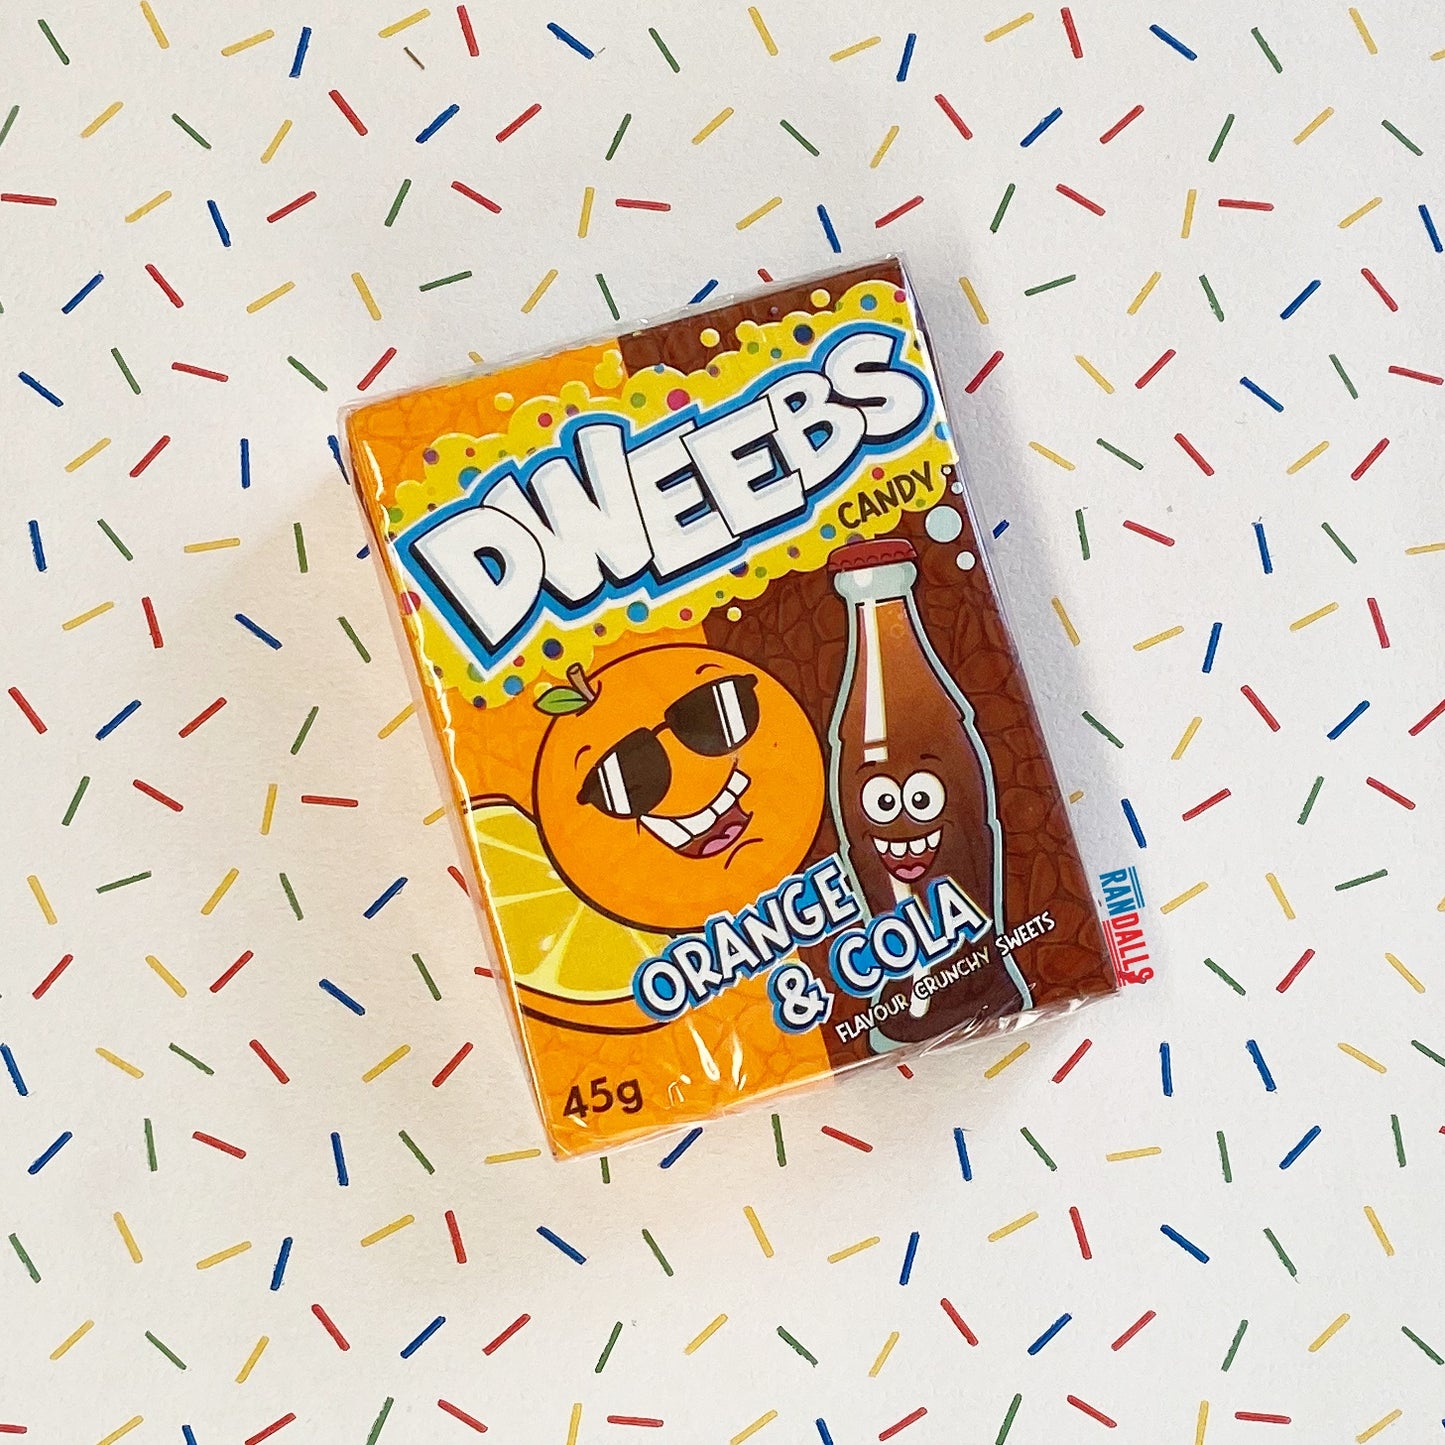 dweebs orange and cola, candy, crunchy sweets, usa, randalls